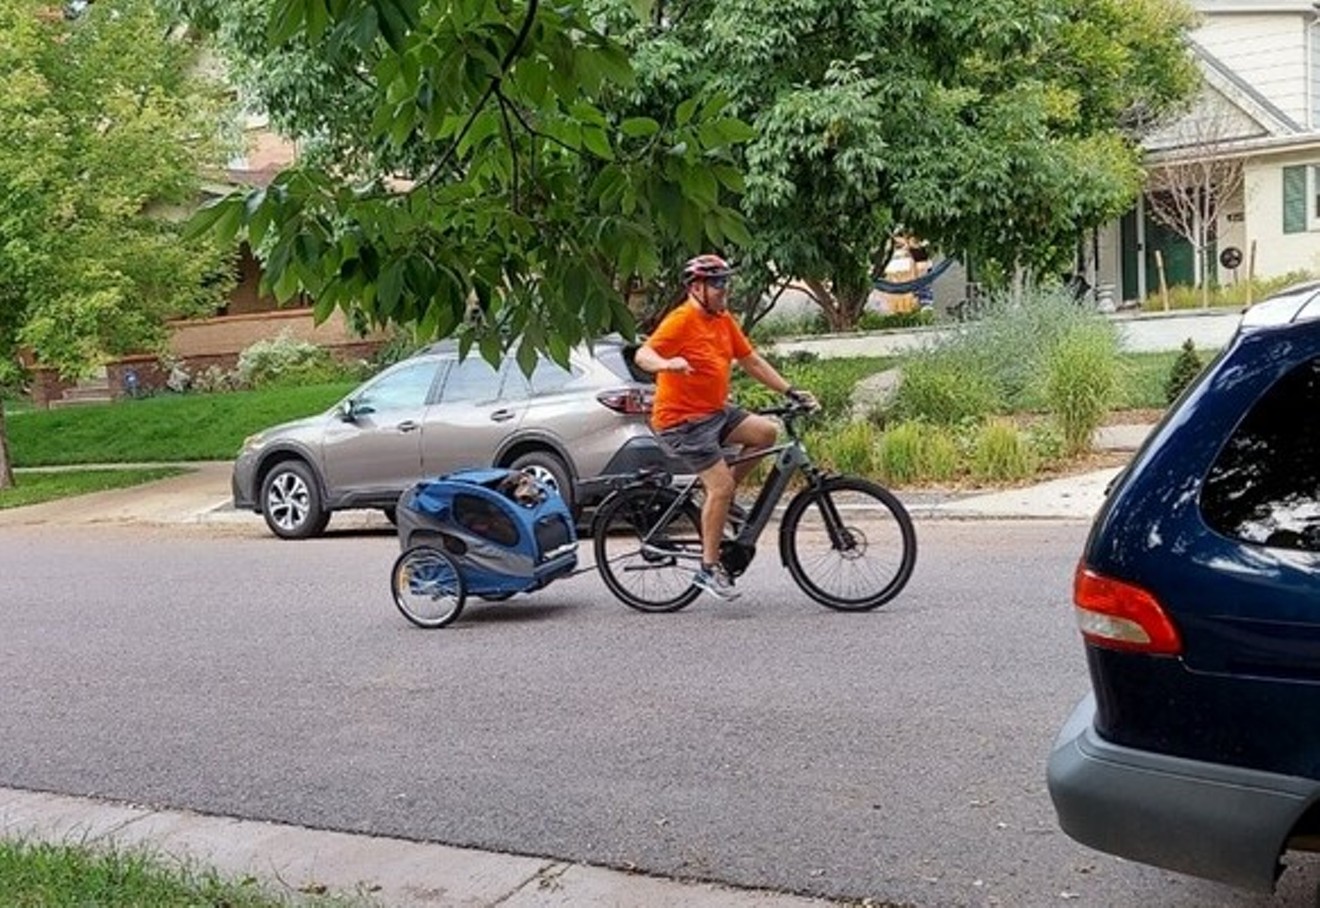 Dave Wolf has retrieved his e-bike from thieves on two separate occasions.